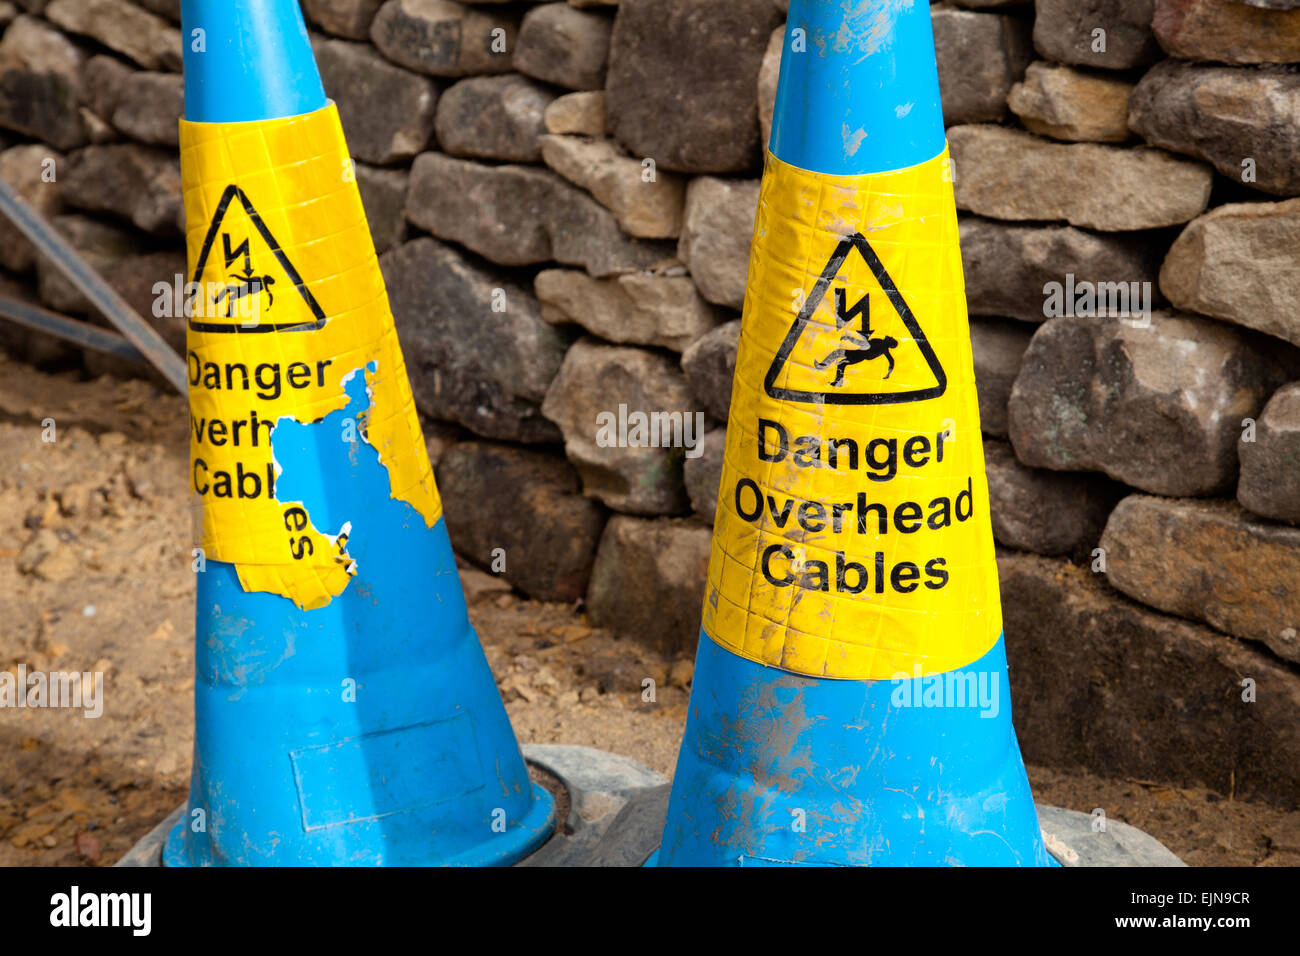 Overhead electricity power lines warning cones in the U.K. Stock Photo